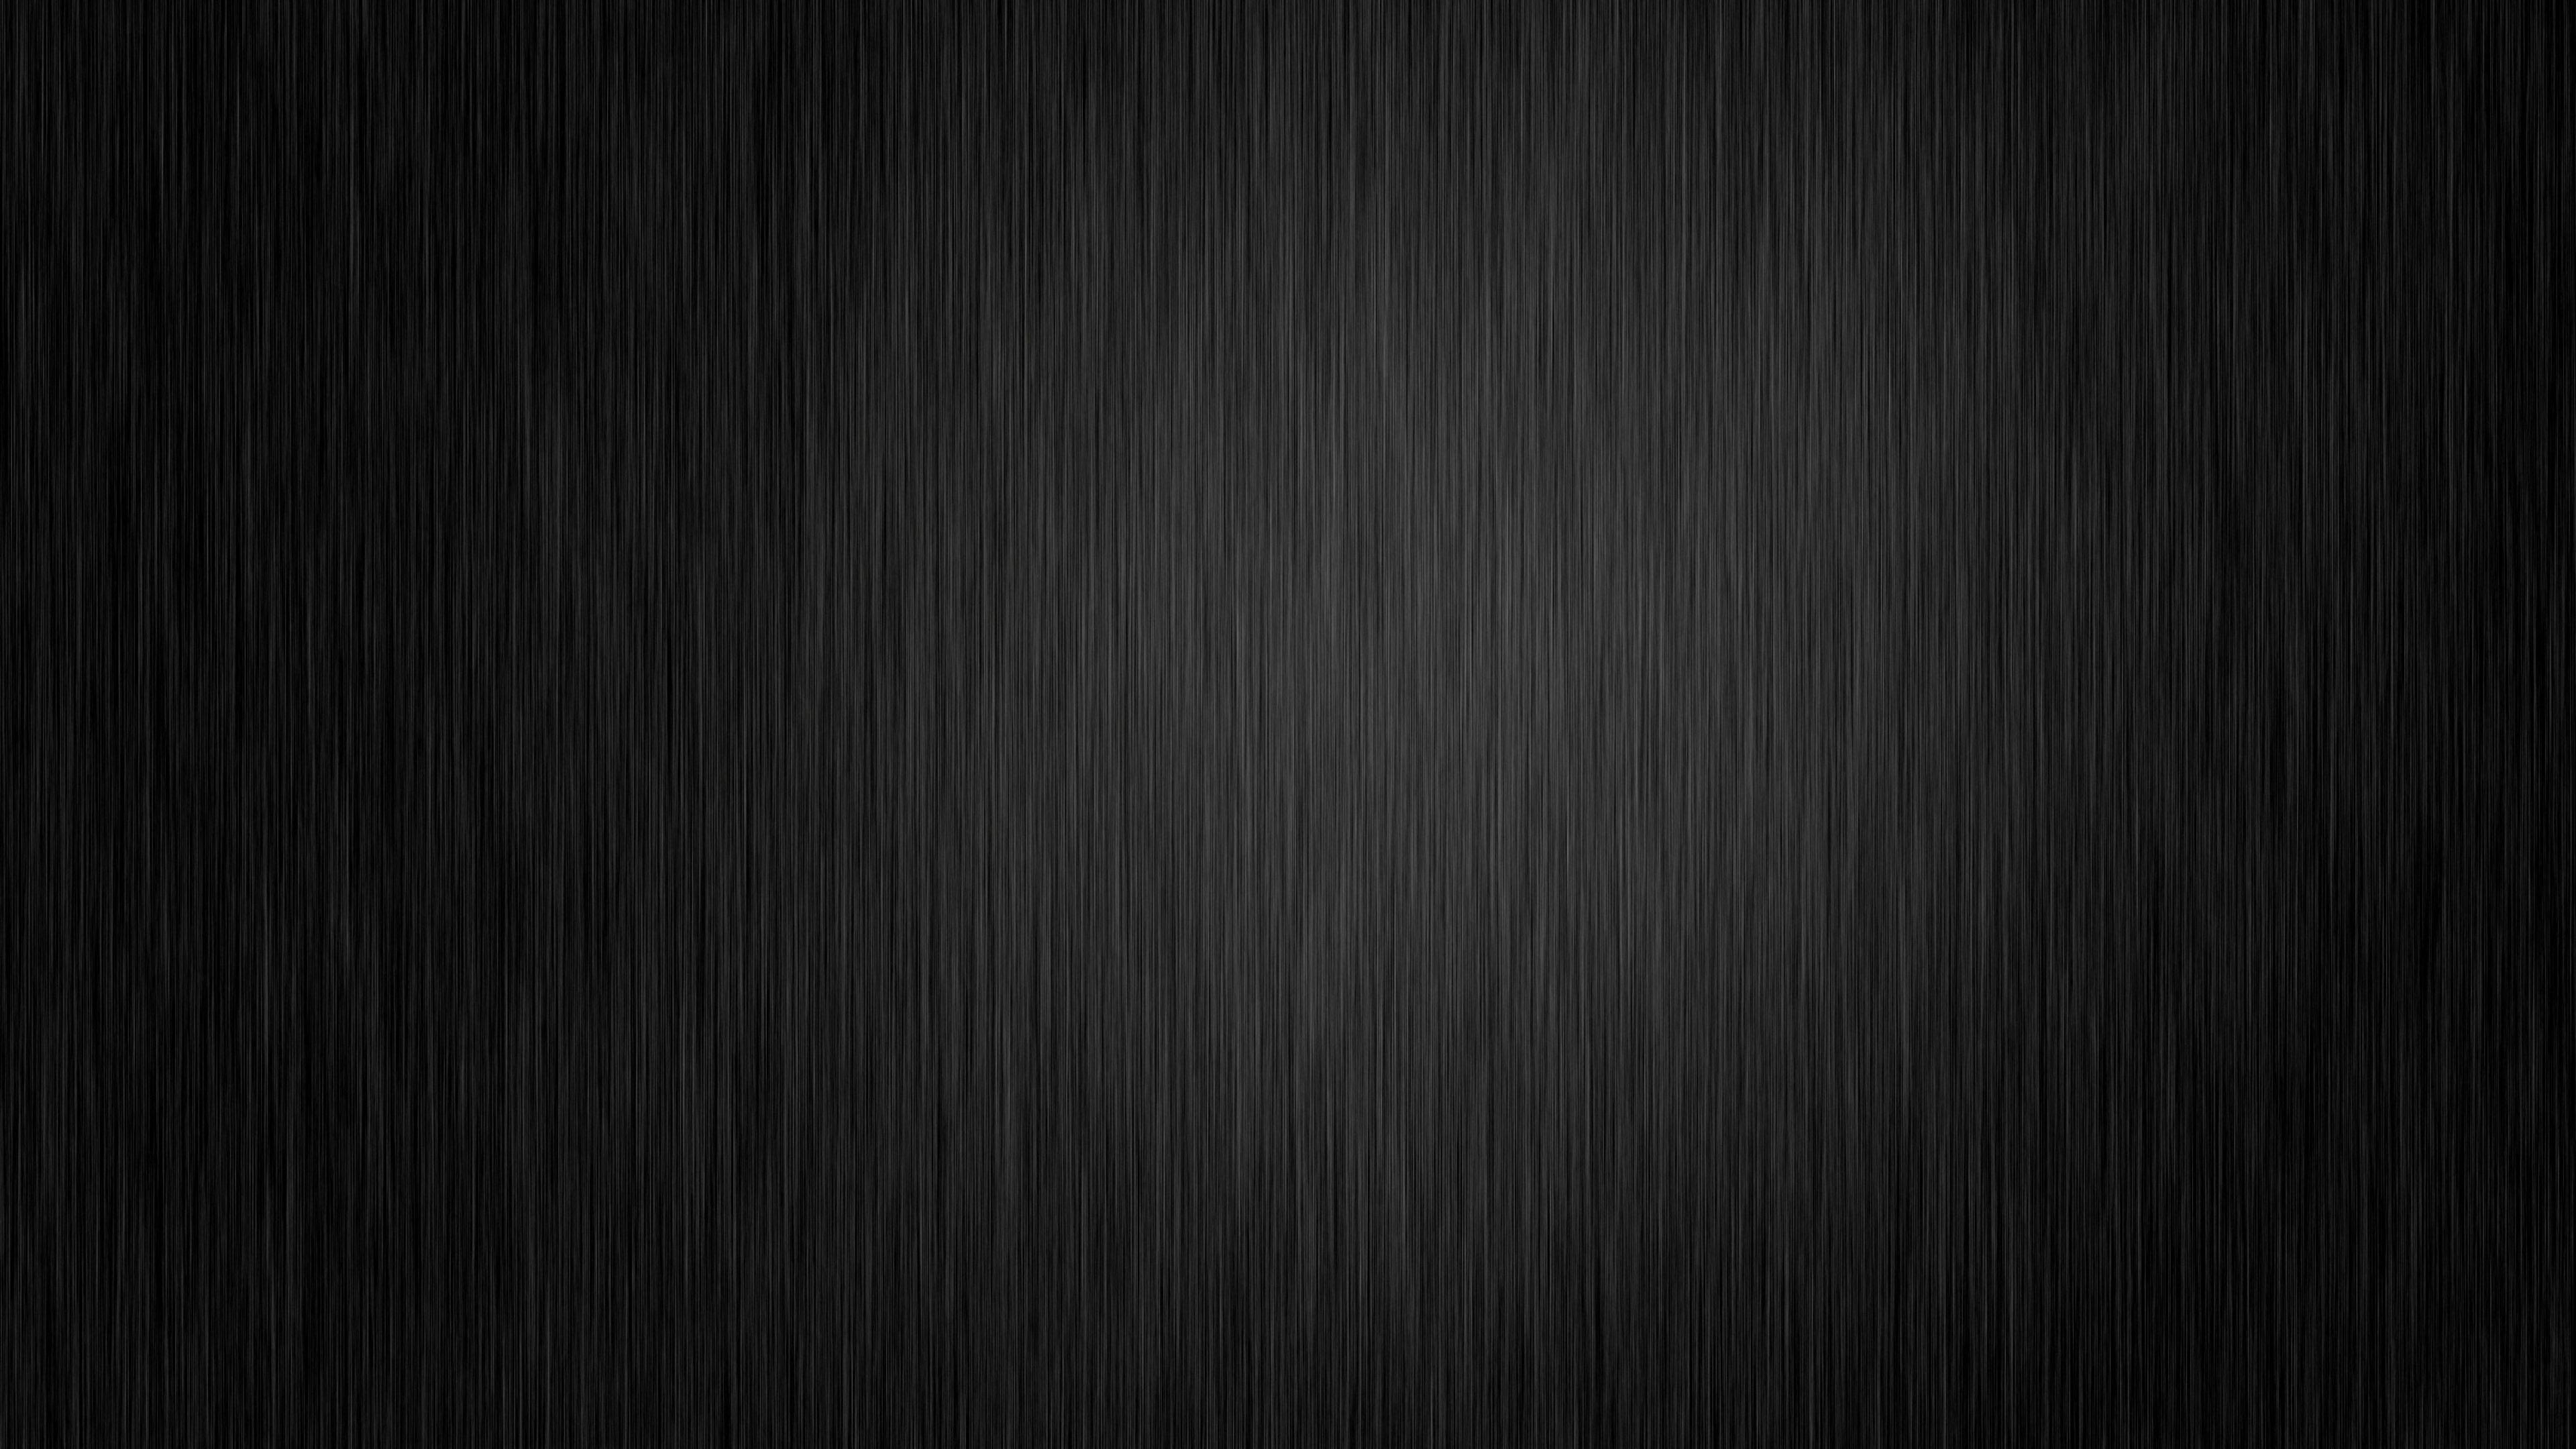 Dark Hd Wallpapers For Mobile Free Download